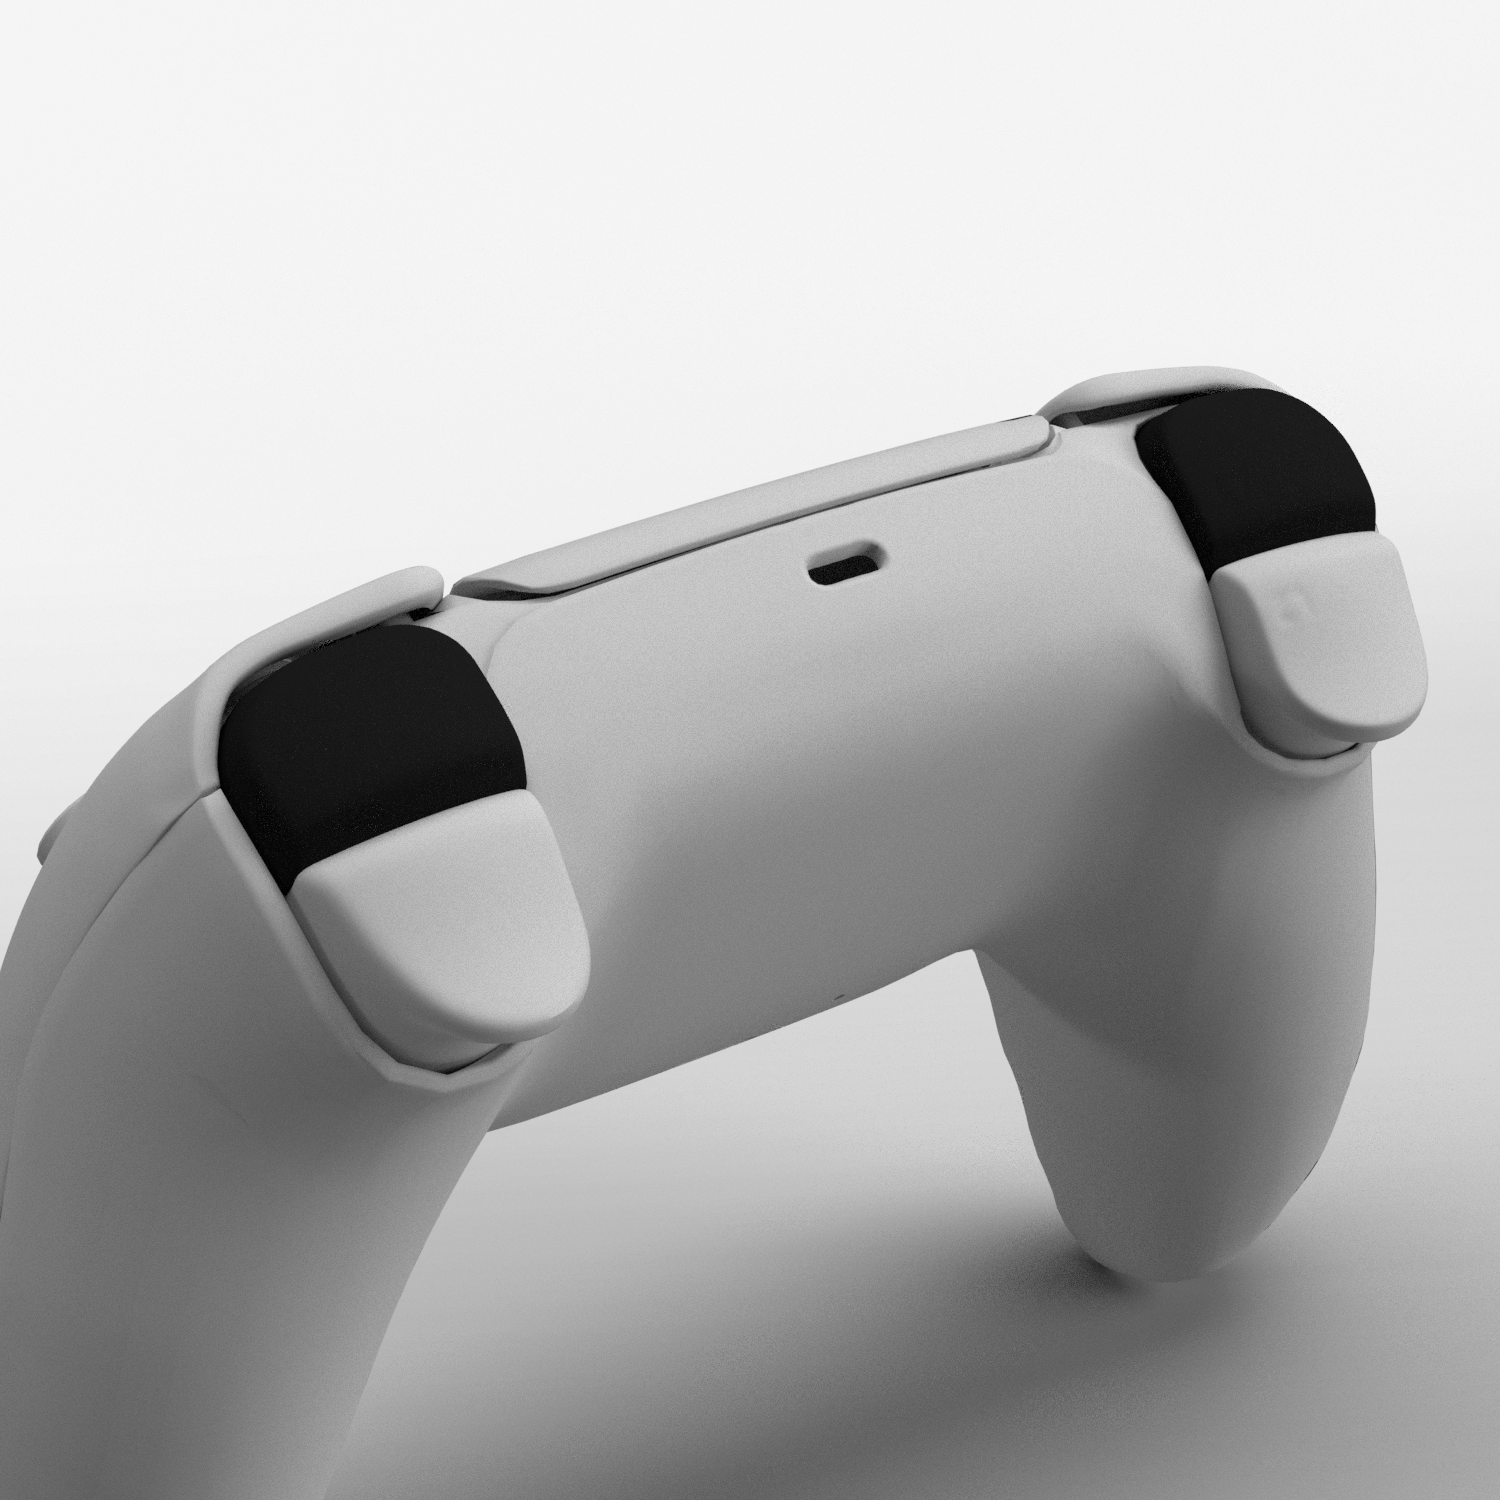 PS5 Soft Touch Bumper